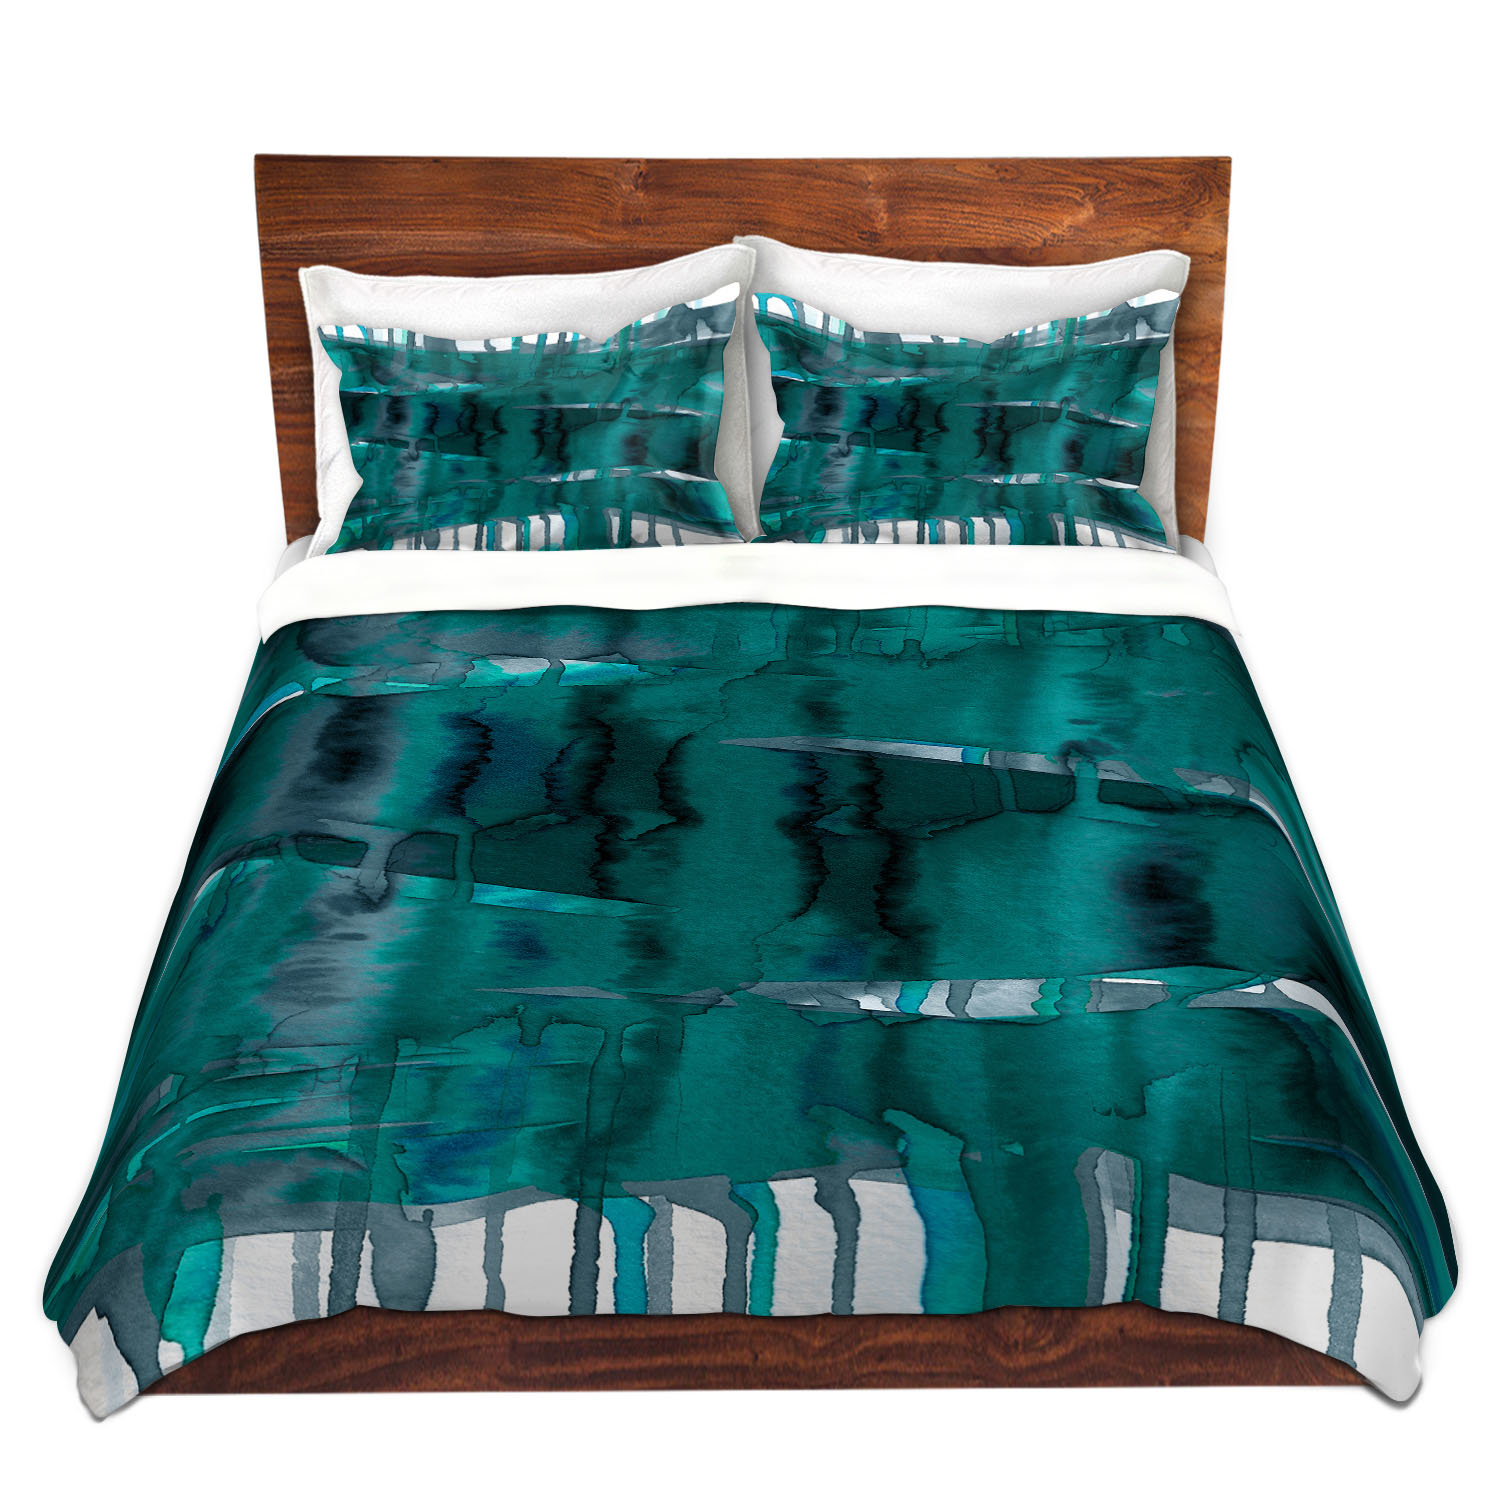 Dianoche Microfiber Duvet Covers By Julia Di Sano - Balancing Act Teal